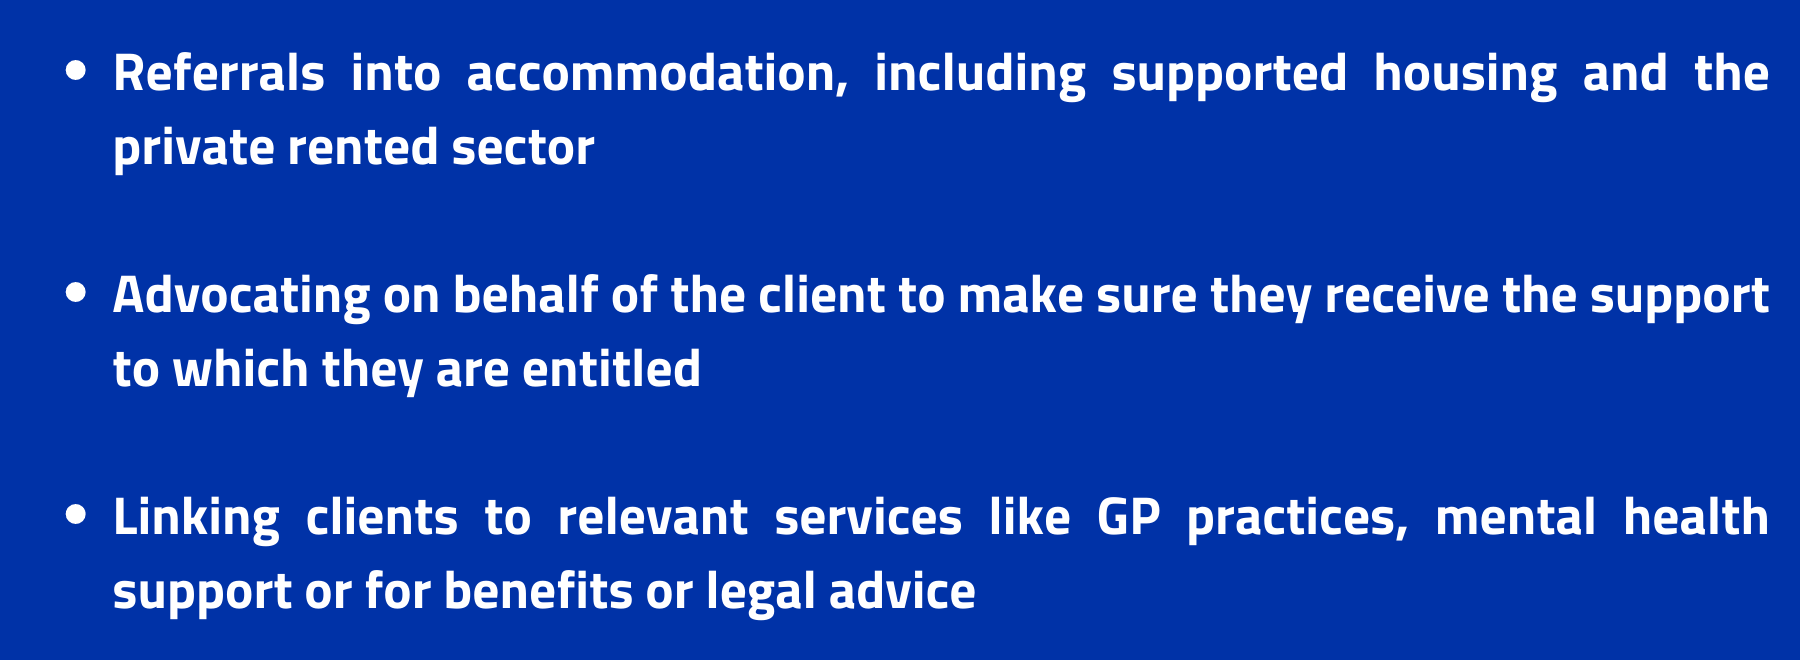 our services- Referrals into accommodation, including supported housing and the private rented sector

Advocating on behalf of the client to make sure they receive the support to which they are entitled

Linking clients to relevant services like GP practices, mental health support or for benefits or legal advice 